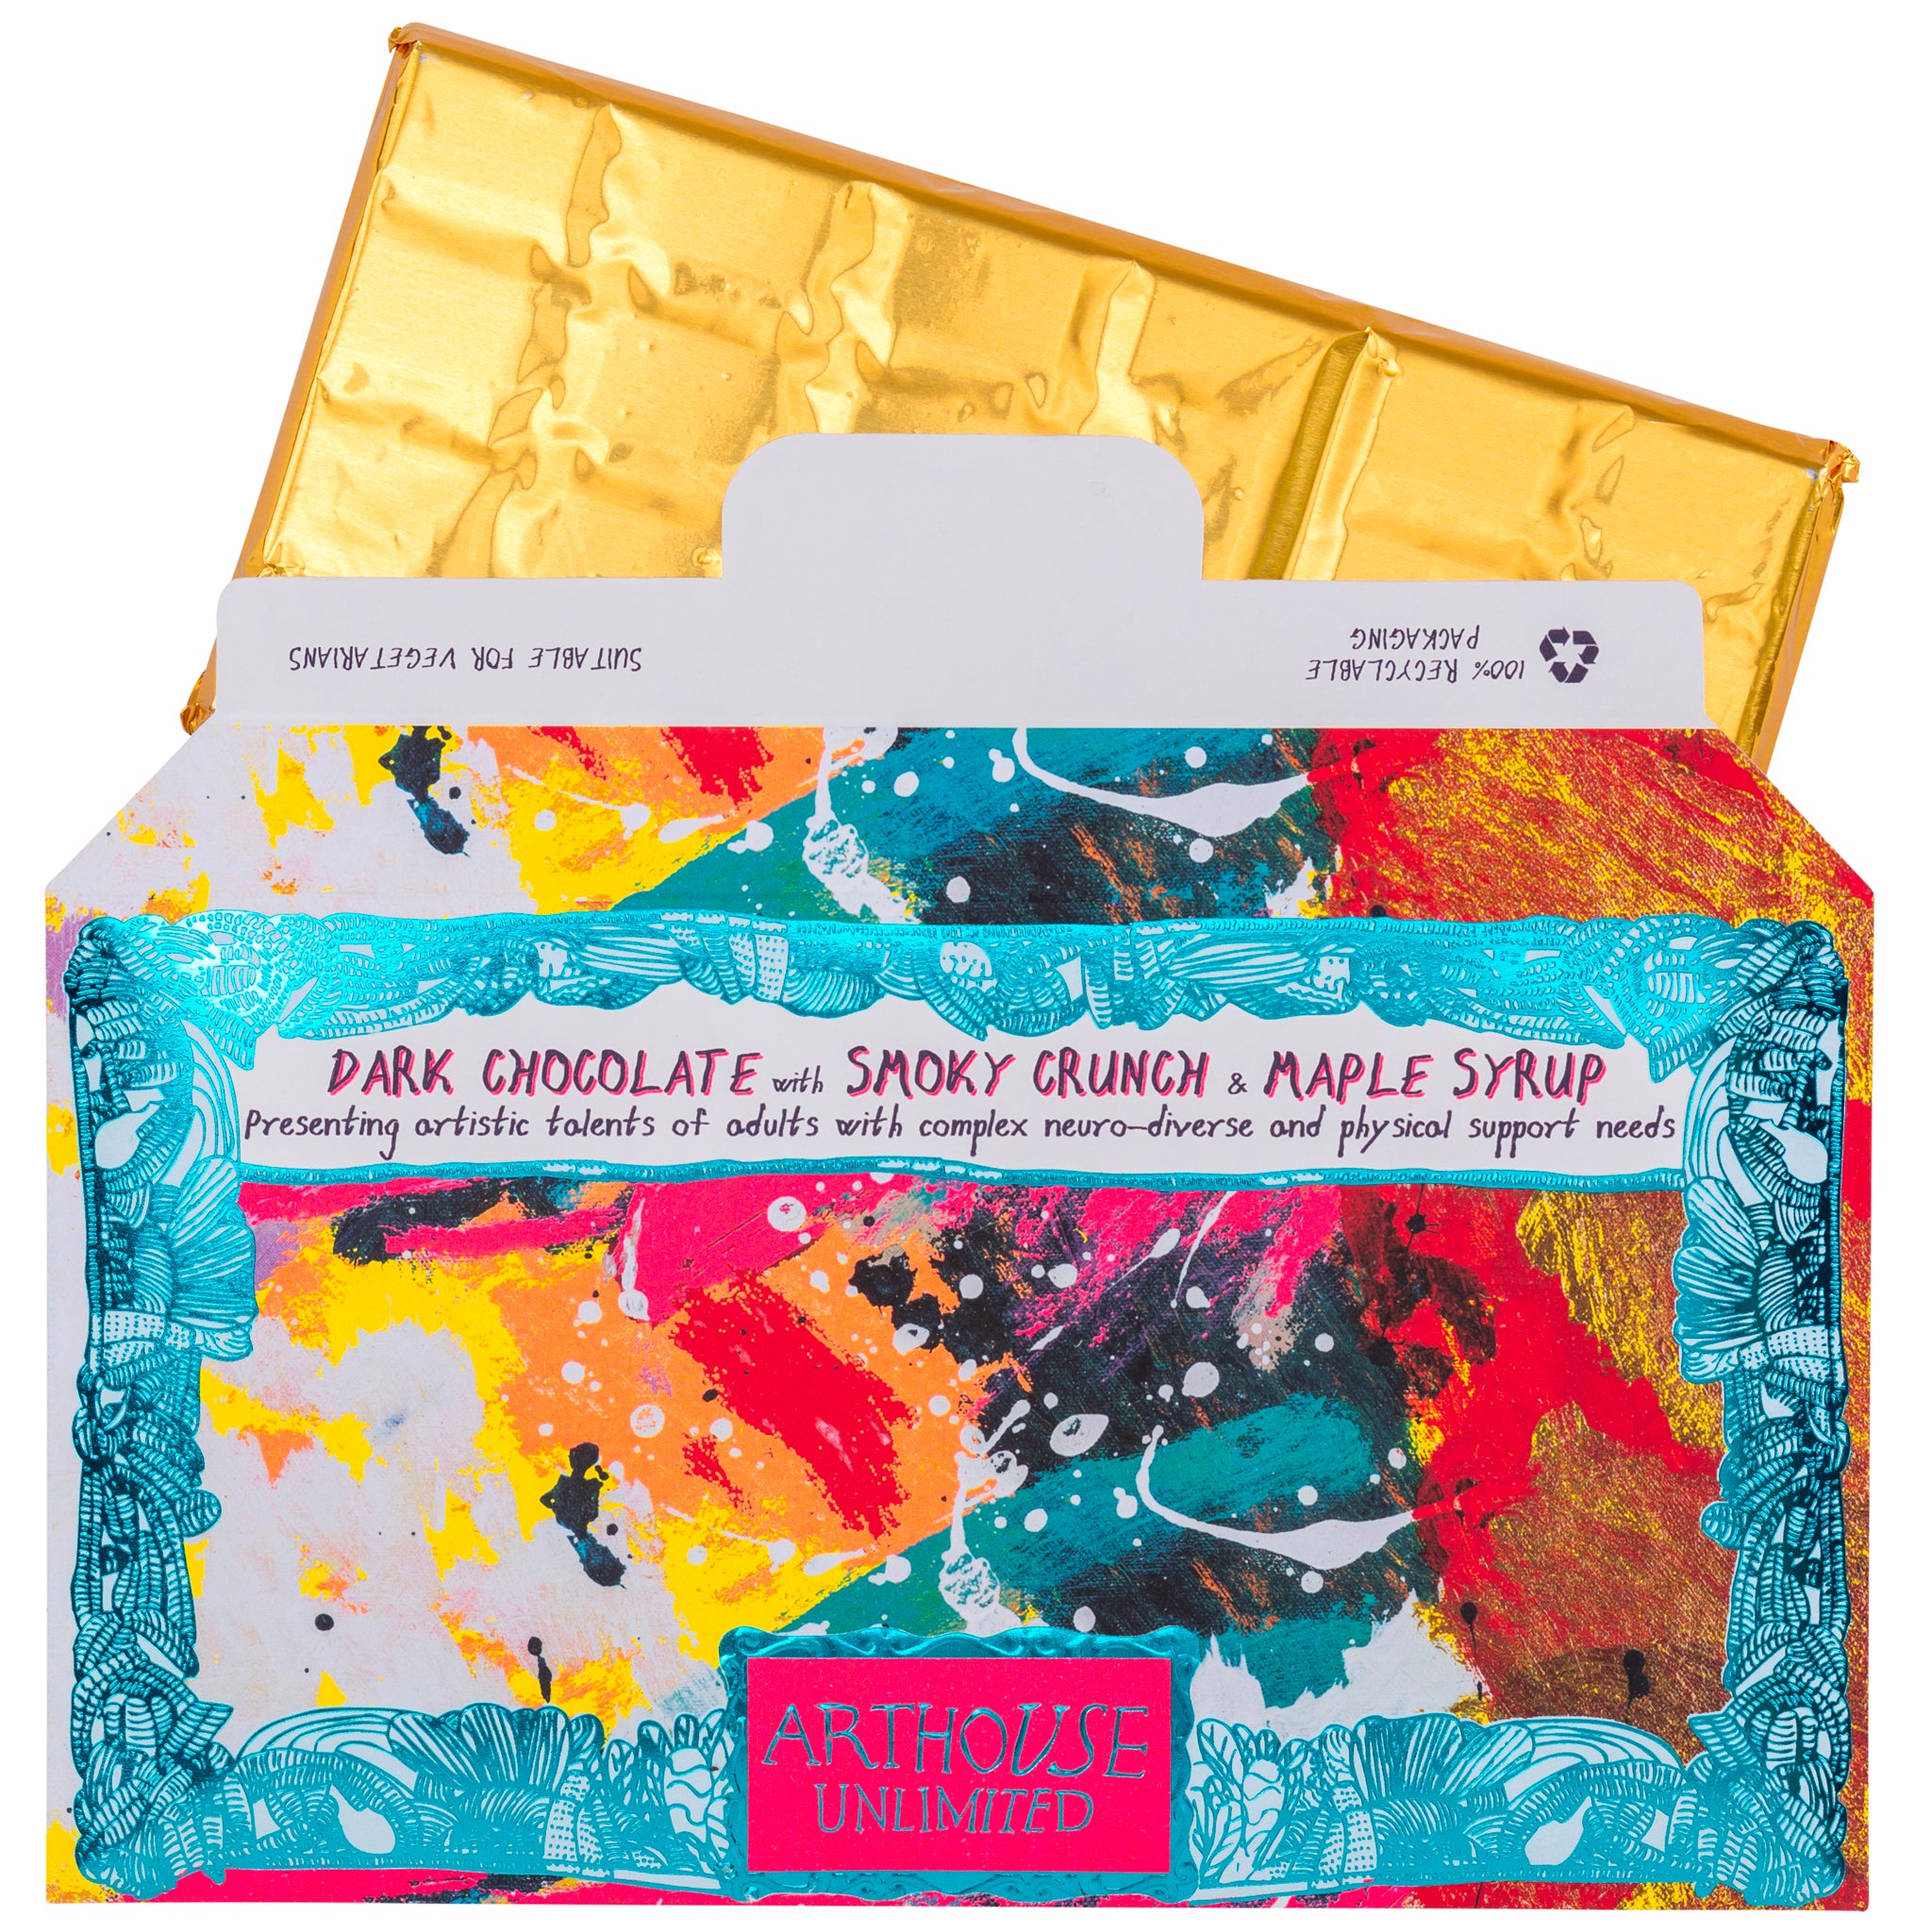 Open packet of Adventurous, Dark Chocolate Bar with Smoky Crunch & Maple Syrup with gold foil